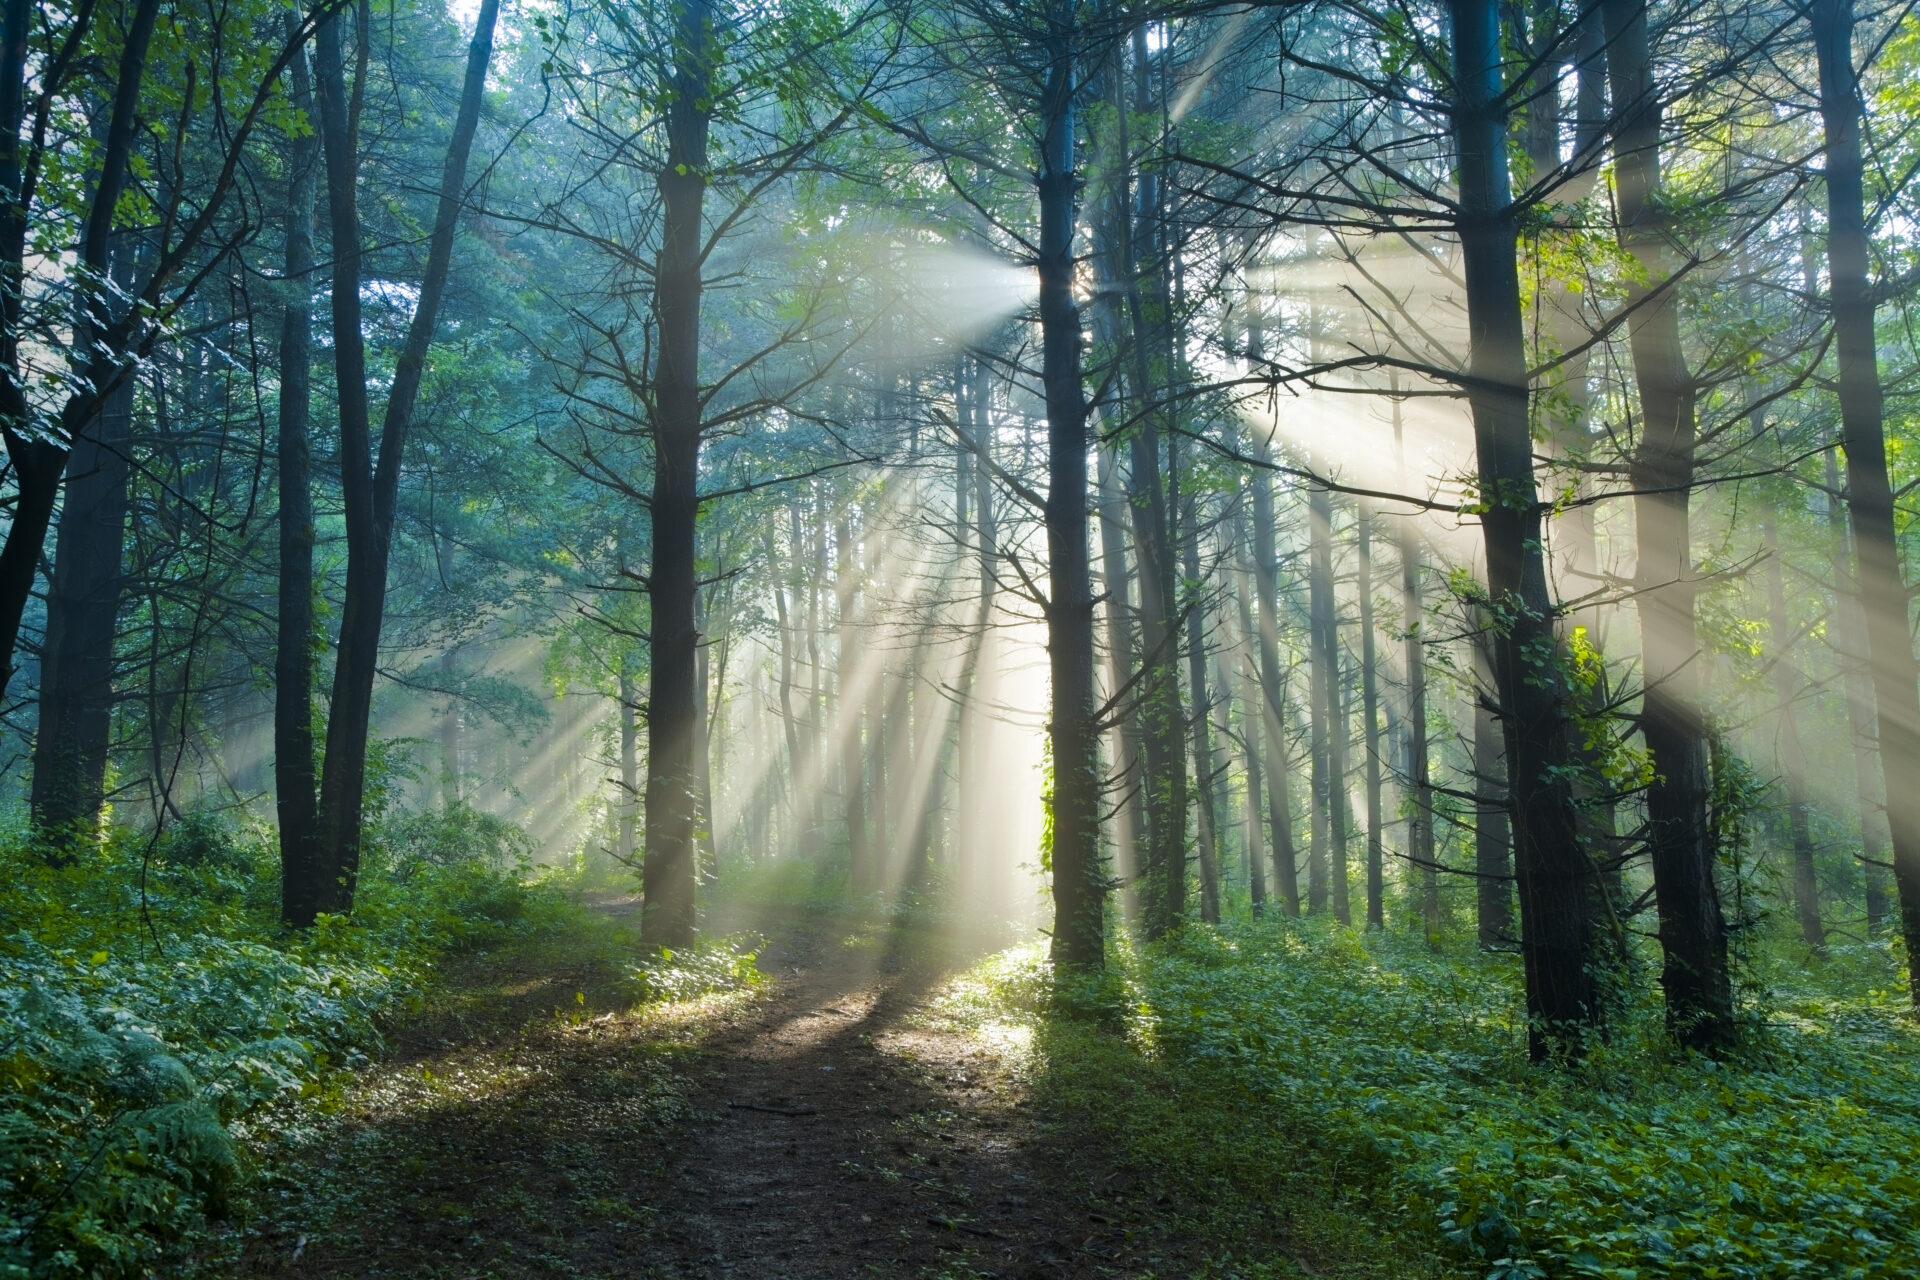 Sun rising through a foggy forest in the summer.I invite you to view some of my other Forest images: